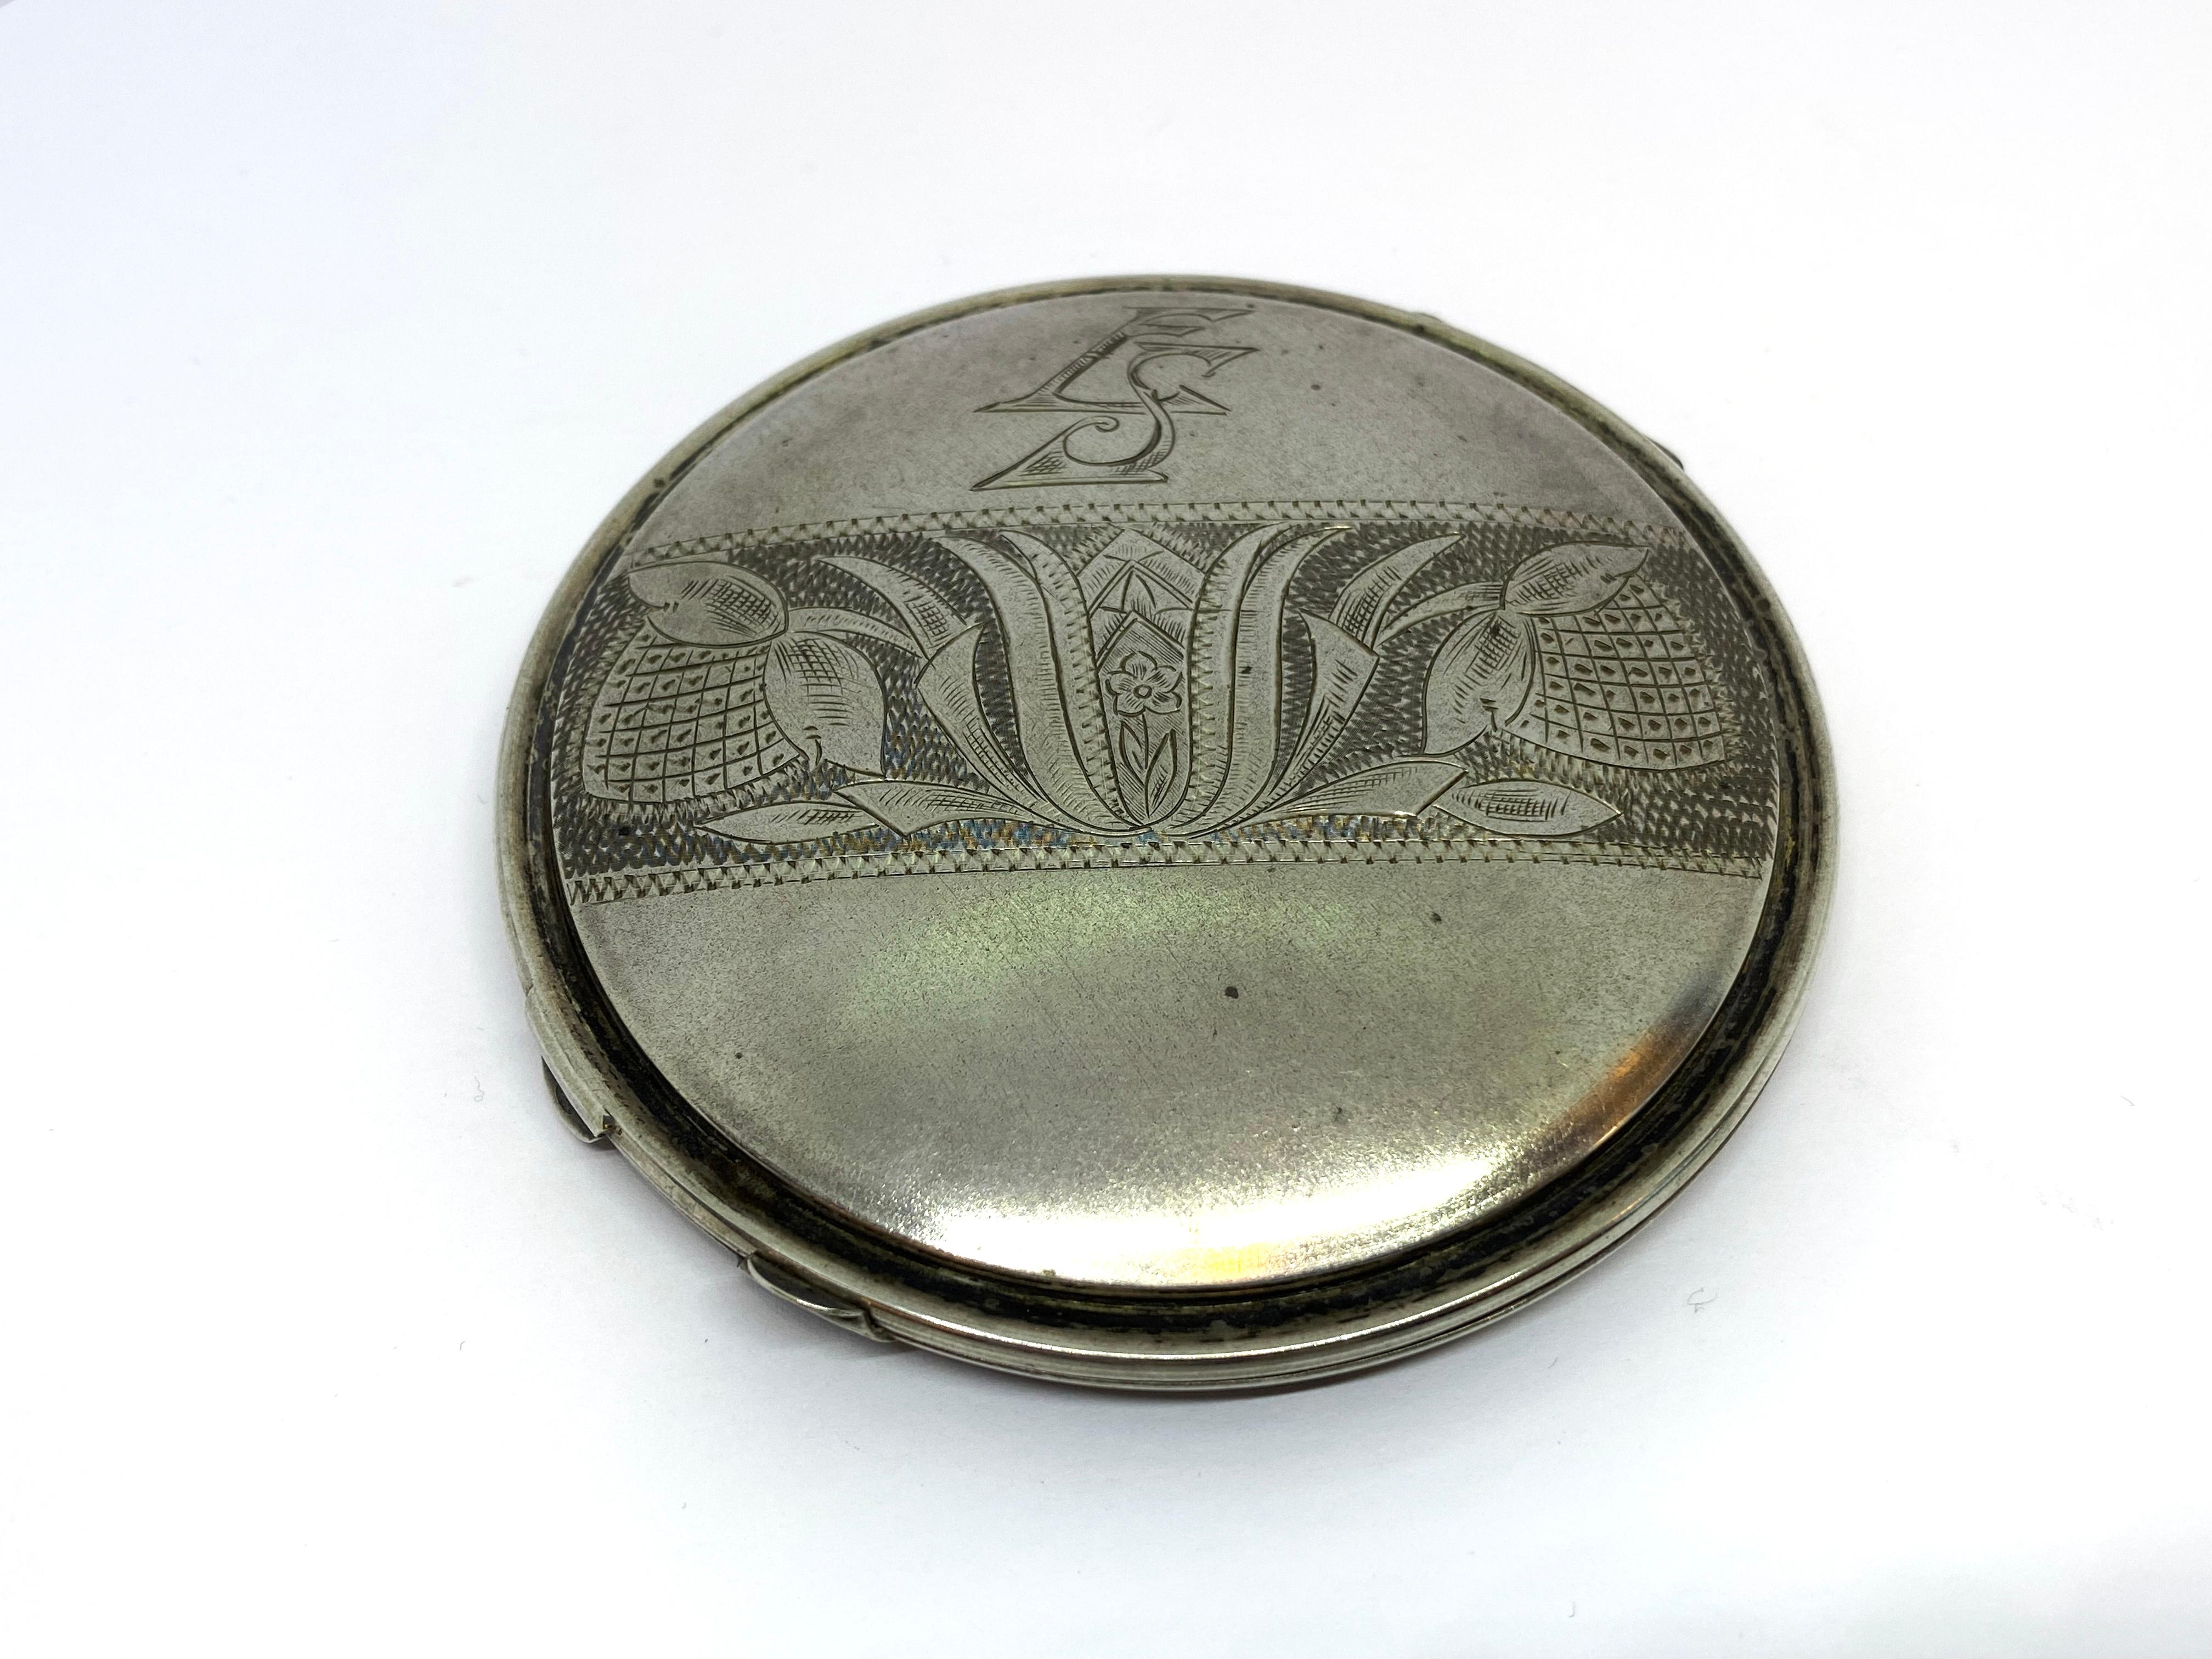 Silver Make up Powder Box Estonia Tallin.
Really great Powder Box Silver.
Made in Estonia.
Tallinn, Revall.
875 Silver.
Author's stamp R.S. and stamped the Leijjona sign.
Stain in the mirror.
A really great collectible from the former Soviet Union.